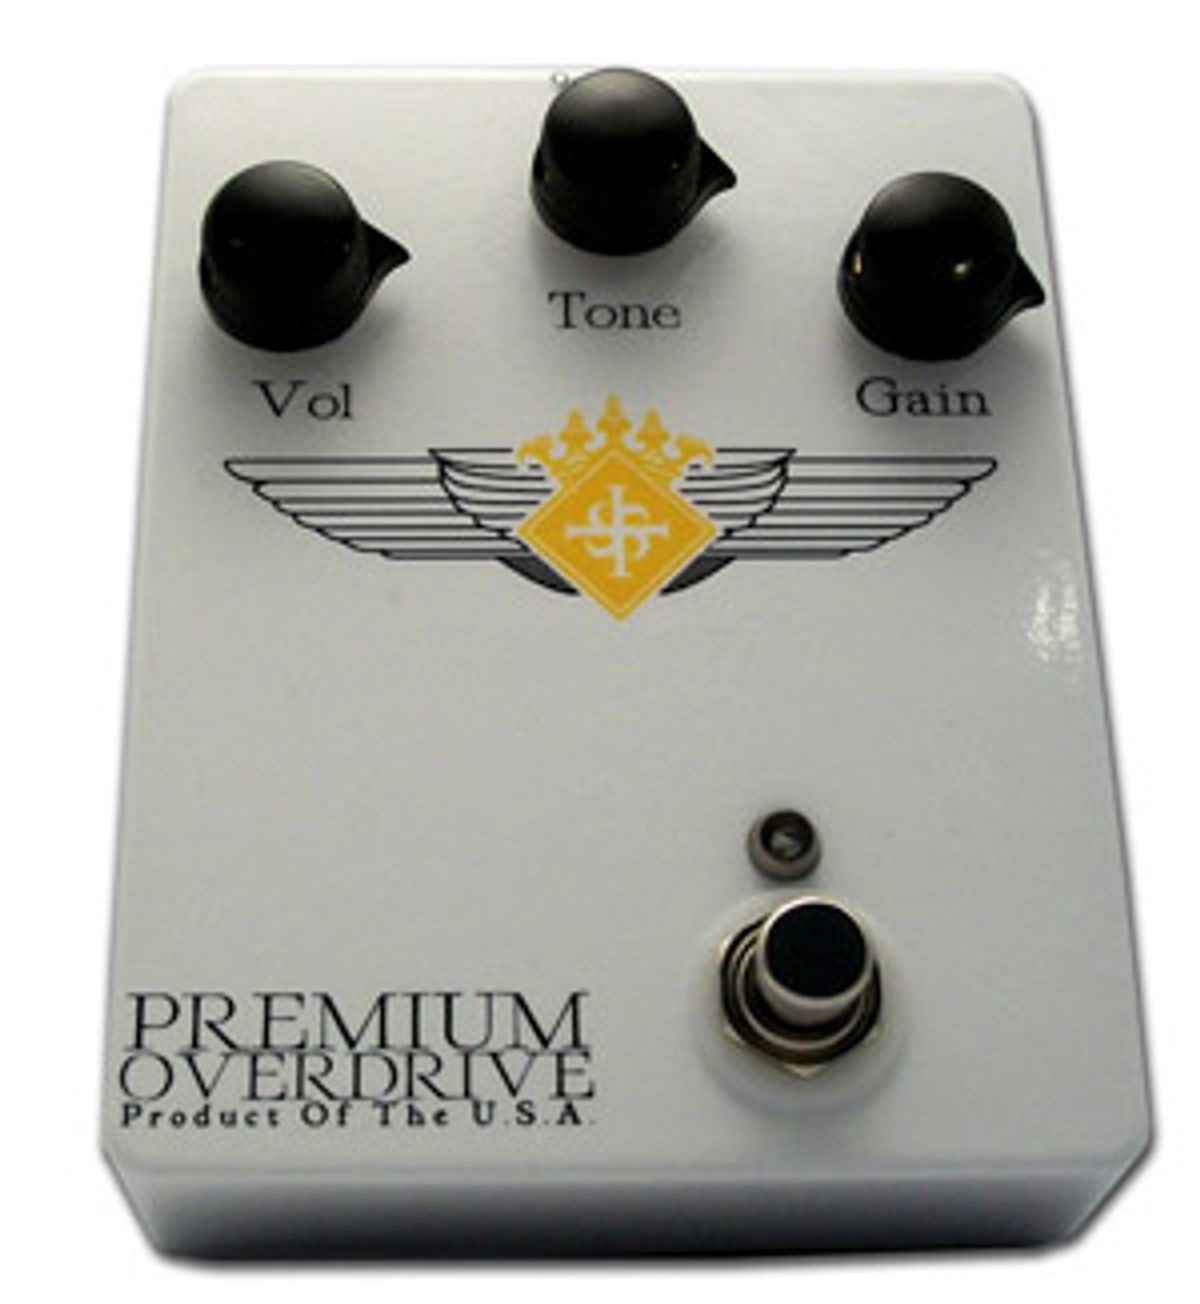 Pro Tone Pedals Introduces the Gold Label Premium Overdrive